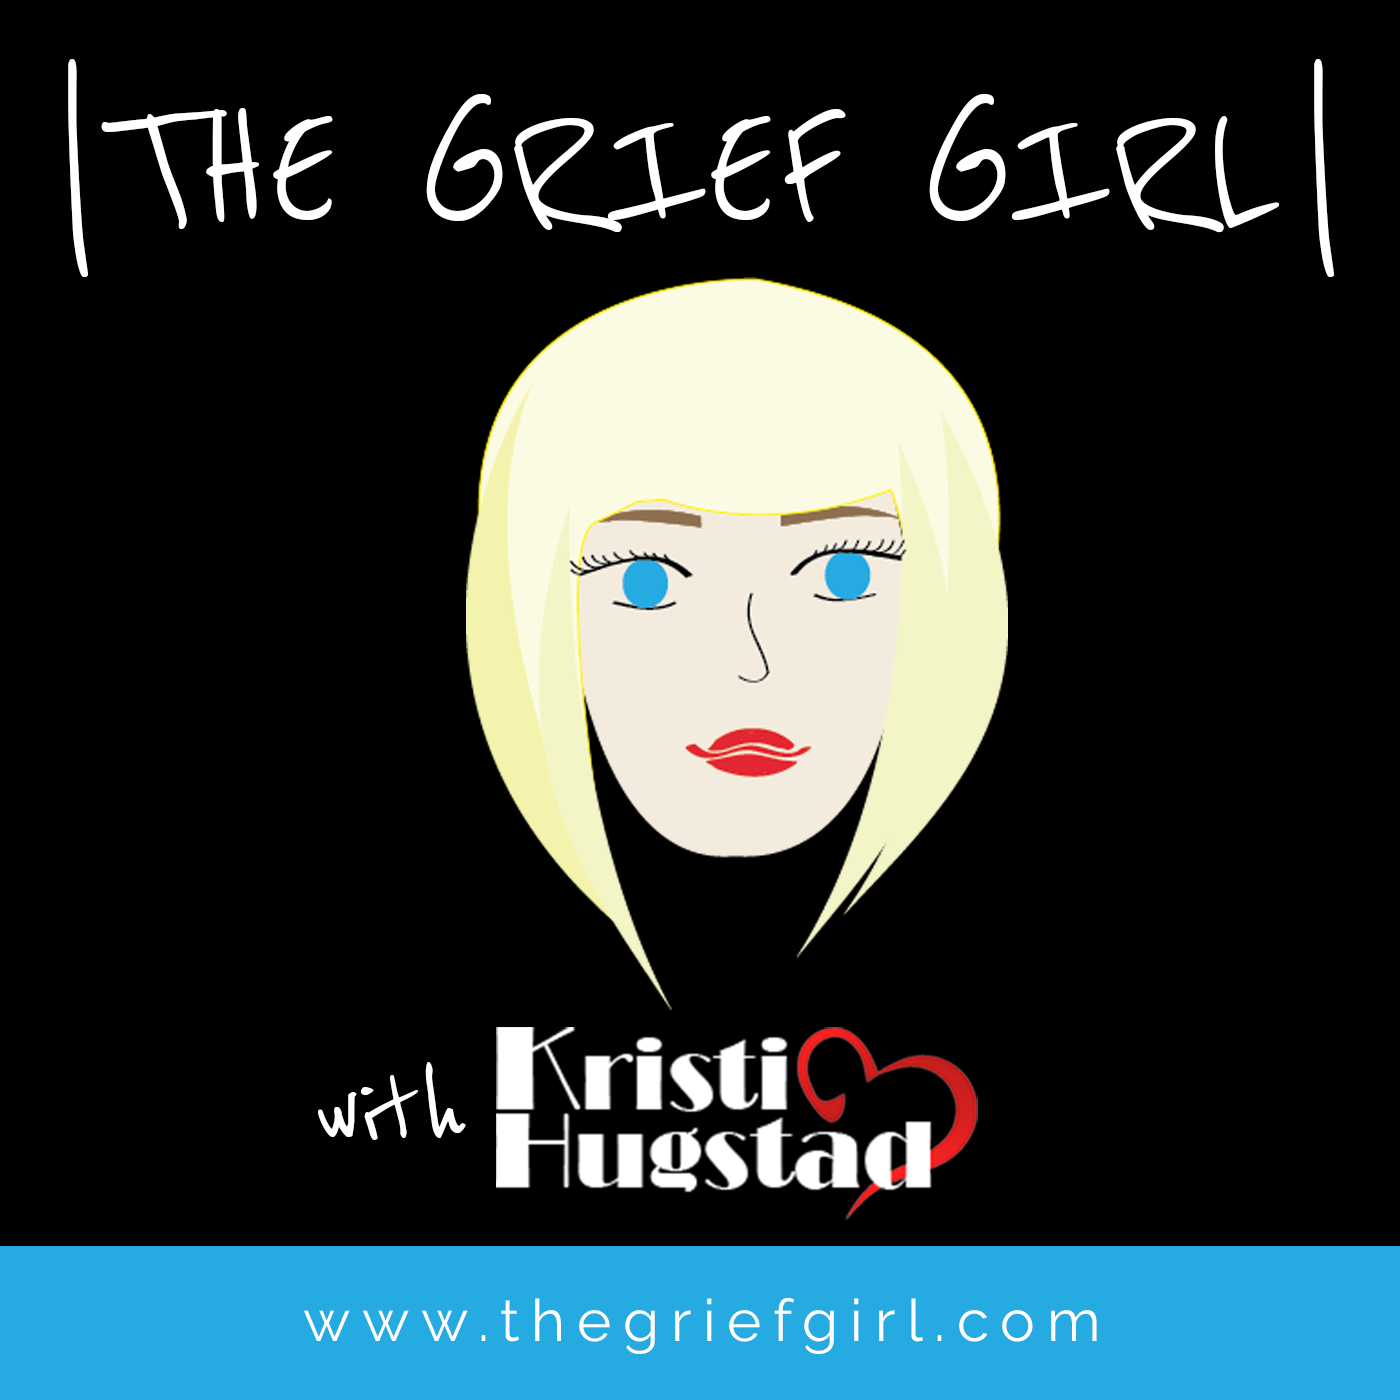 Welcome to THE GRIEF GIRL